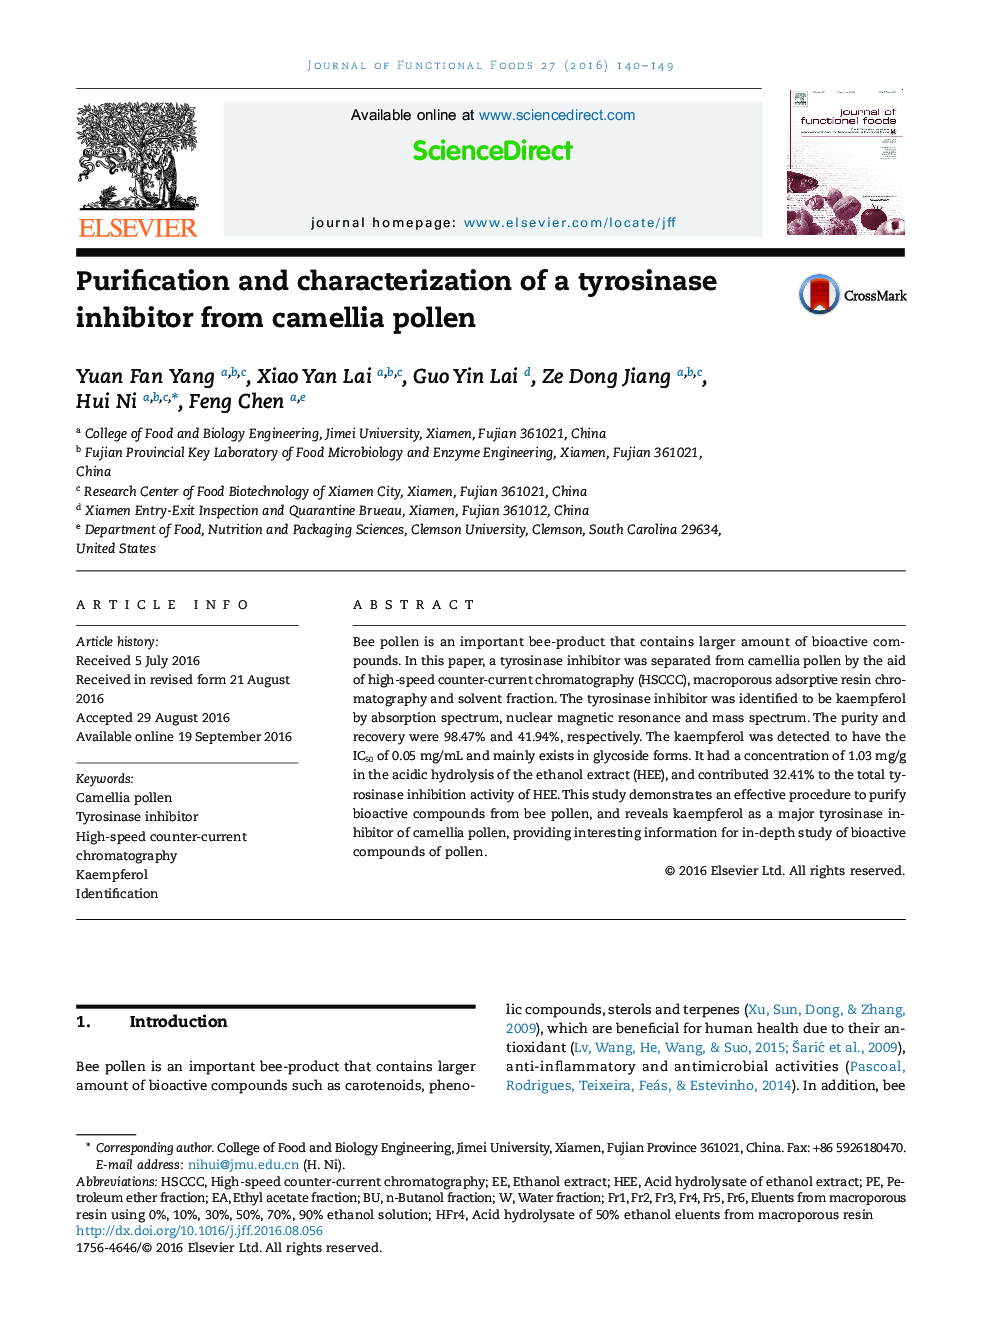 Purification and characterization of a tyrosinase inhibitor from camellia pollen